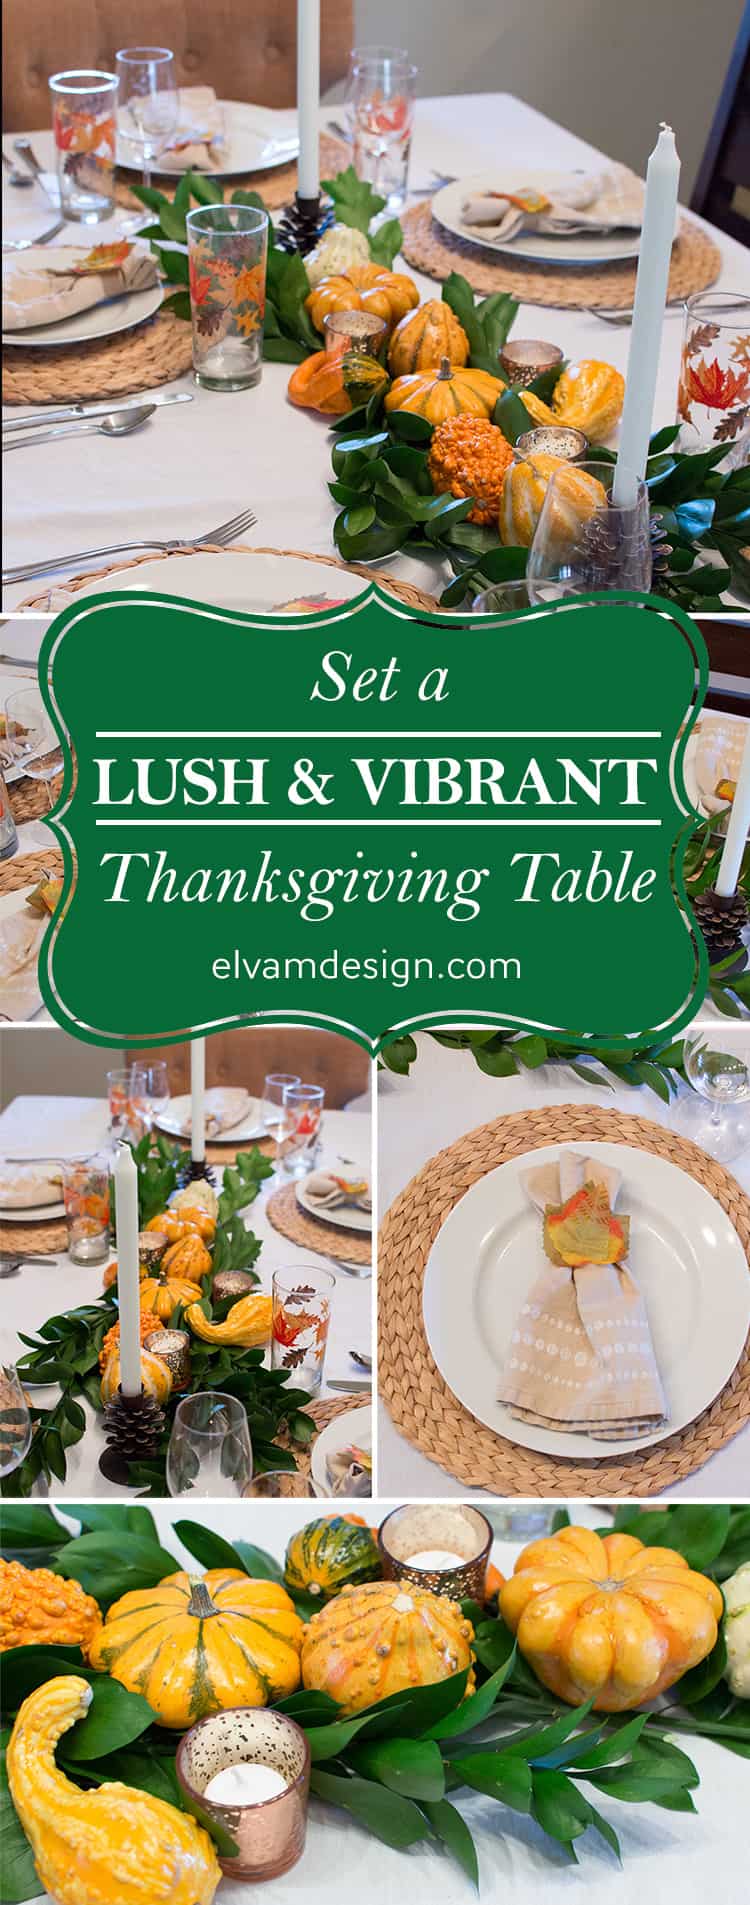 Set a lush and vibrant Thanksgiving table